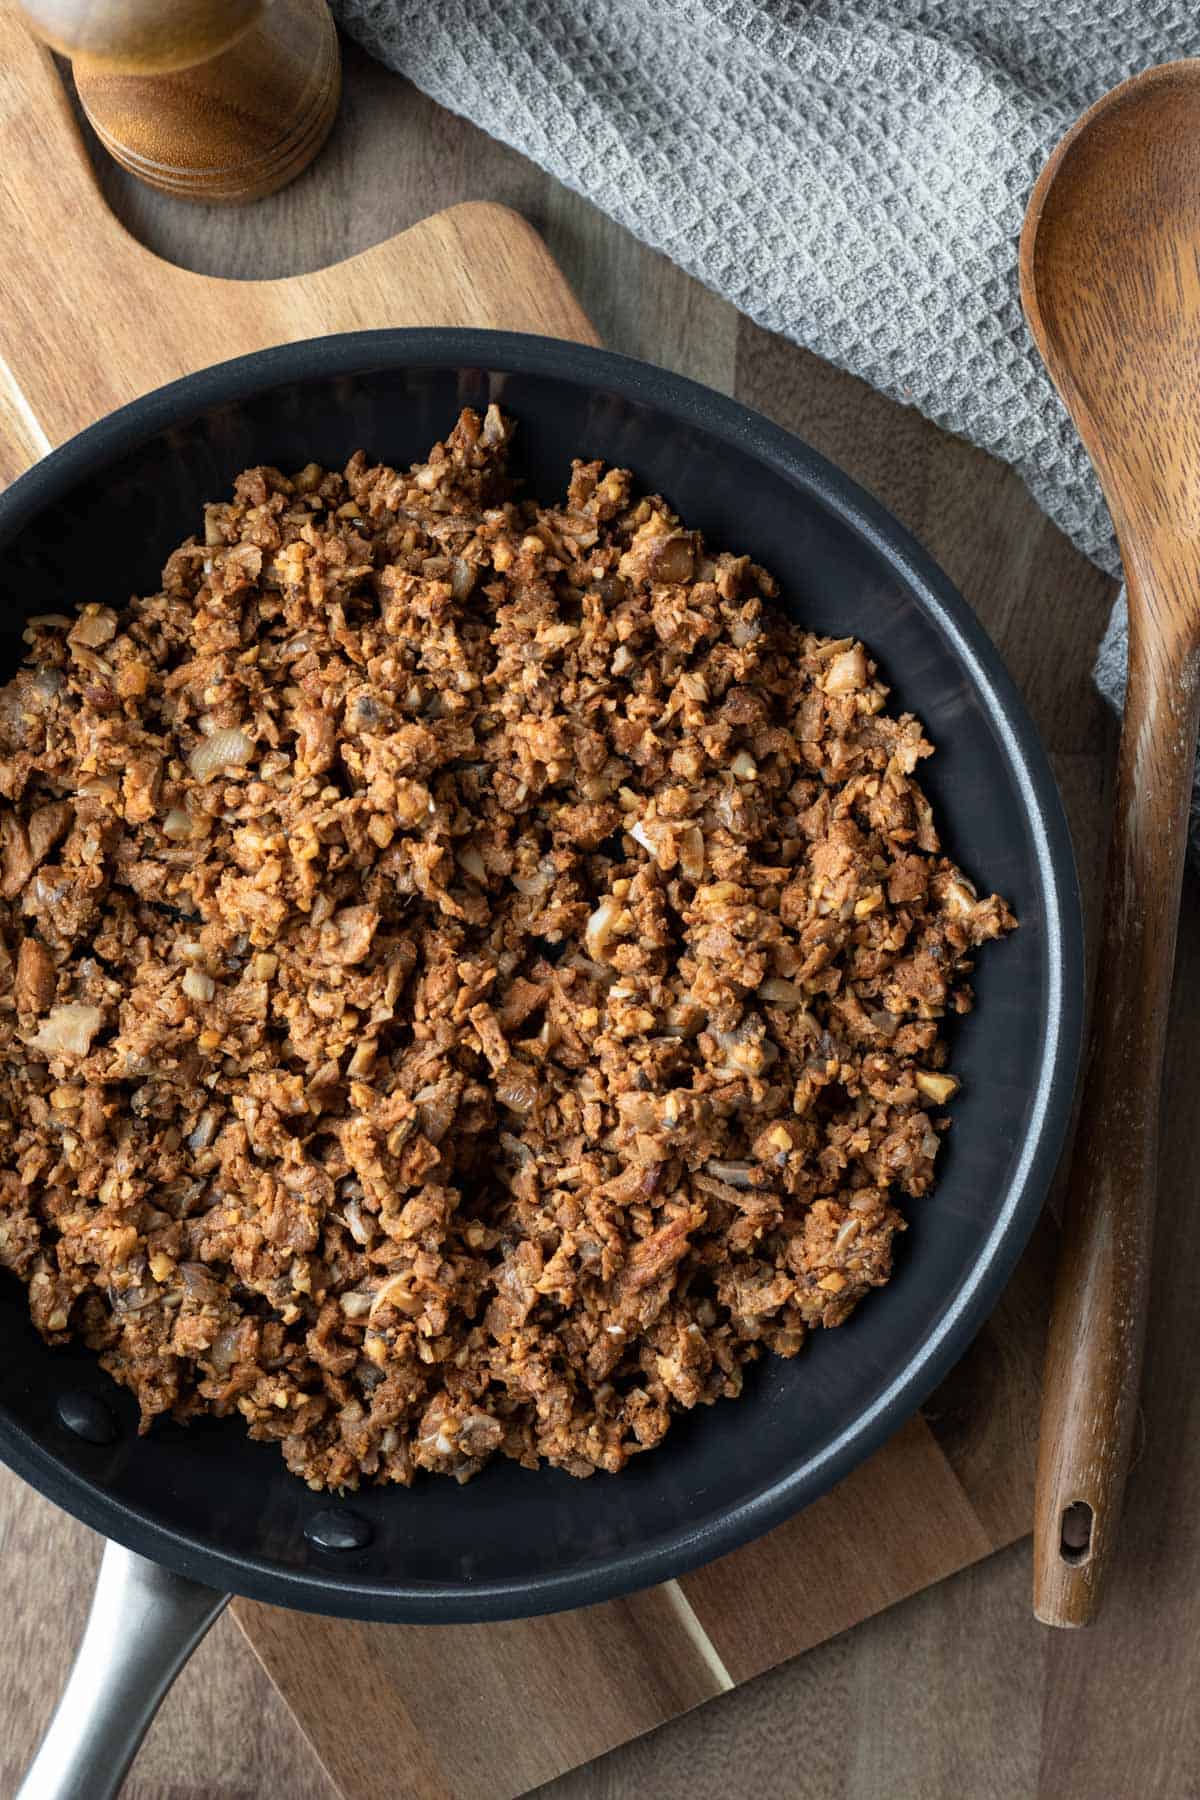 meaty vegan beef substitute with mushrooms, soy curls, and walnuts in a pan.